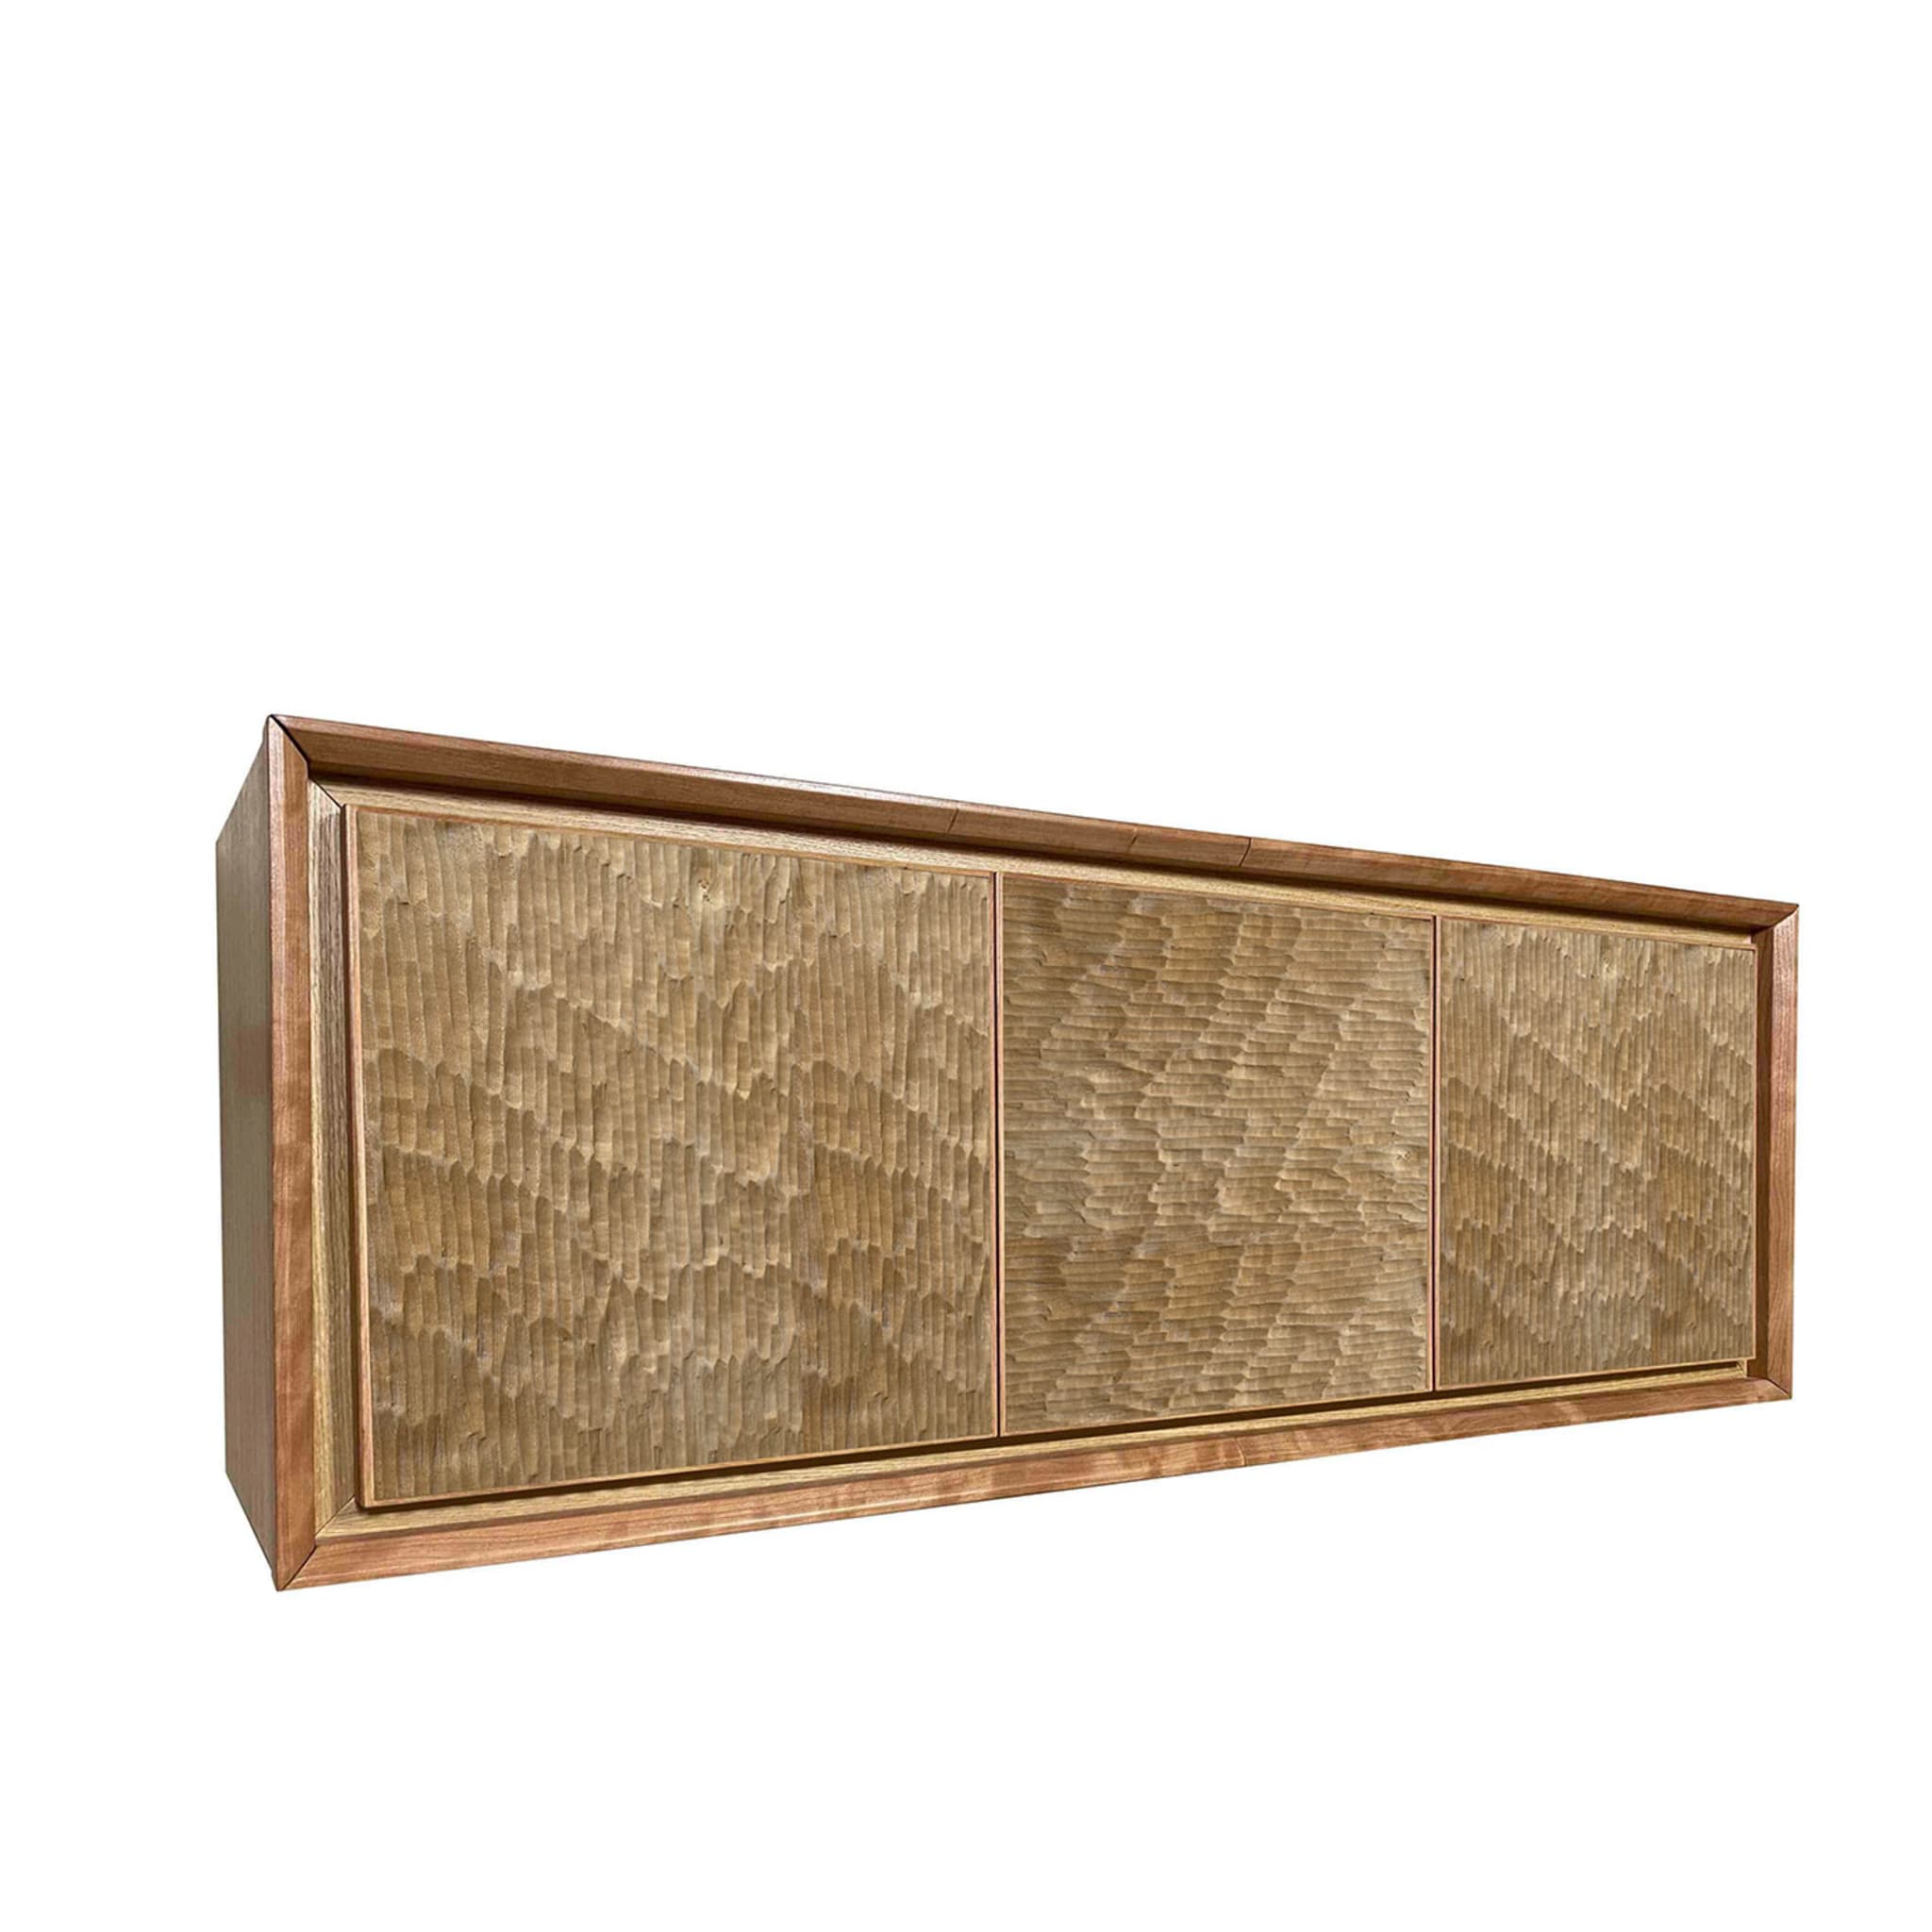 Scolpita 3-Door Carved Wall Sideboard by Mascia Meccani - Alternative view 3